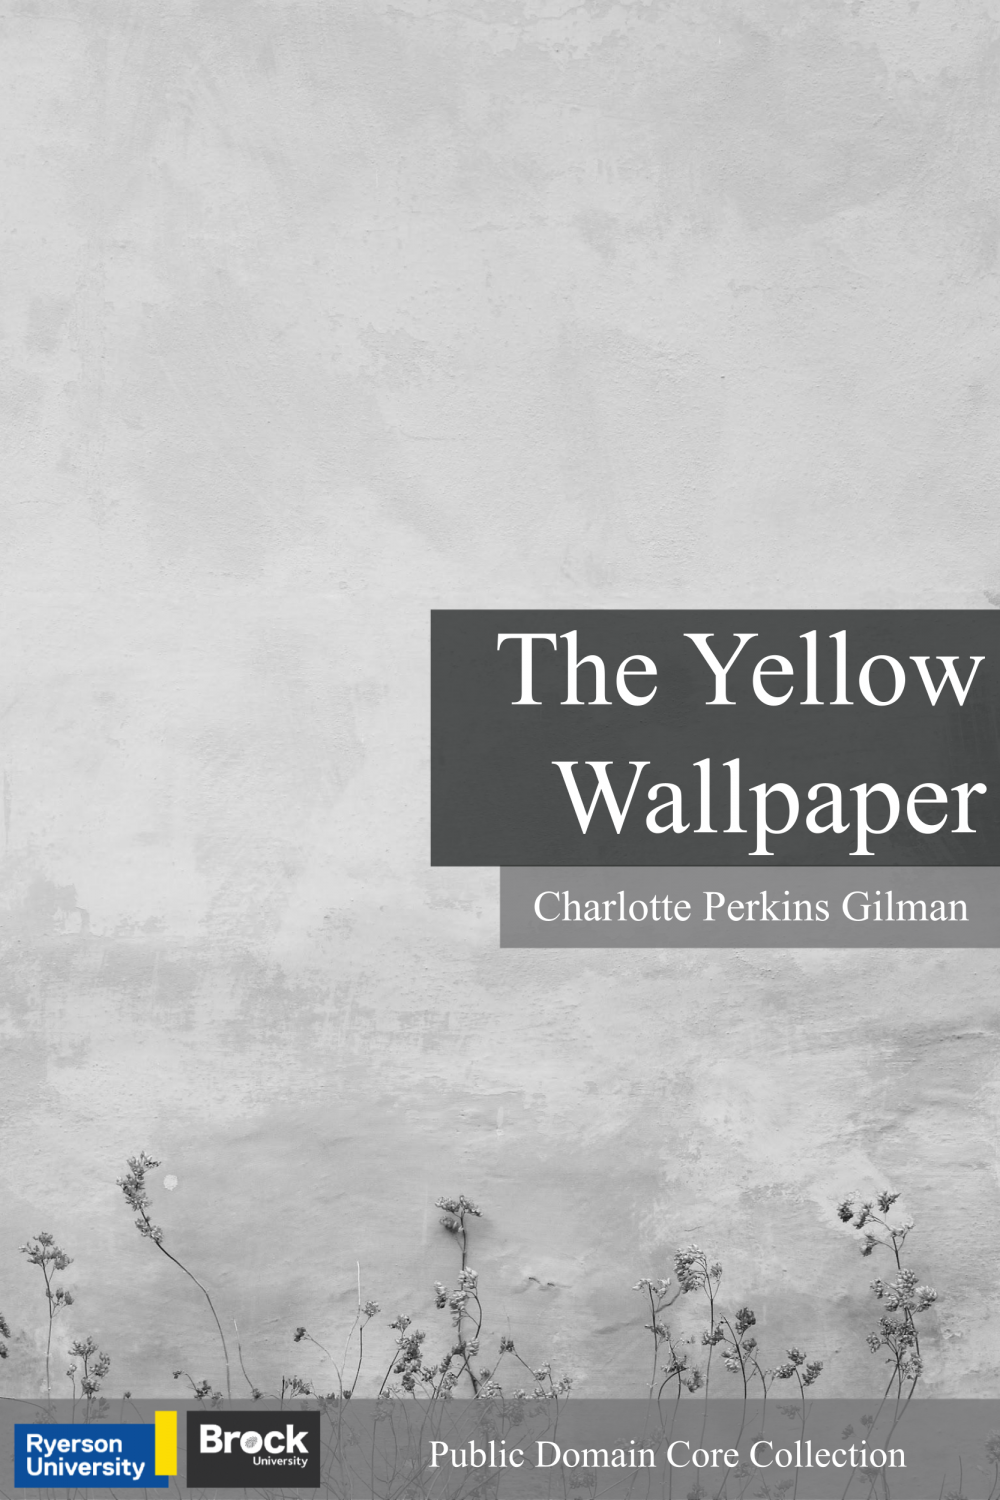 Resistance is futile The Yellow Wall Paper by Charlotte Perkins Gilman